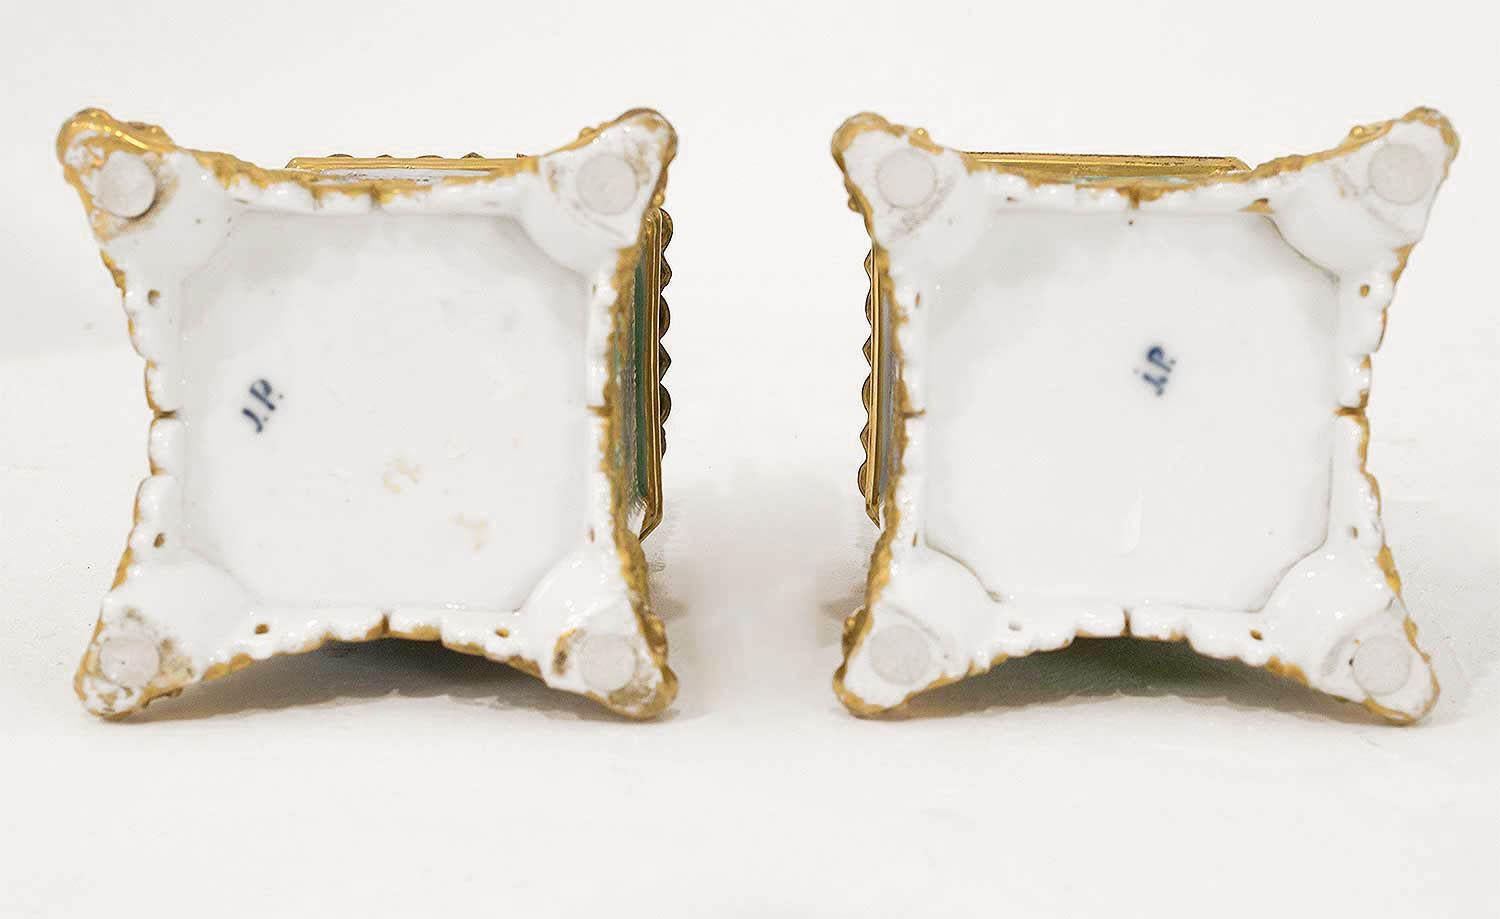 Jacob Petit, Pair of Flasks with Canted Corners in Enameled Porcelain, 1840 3